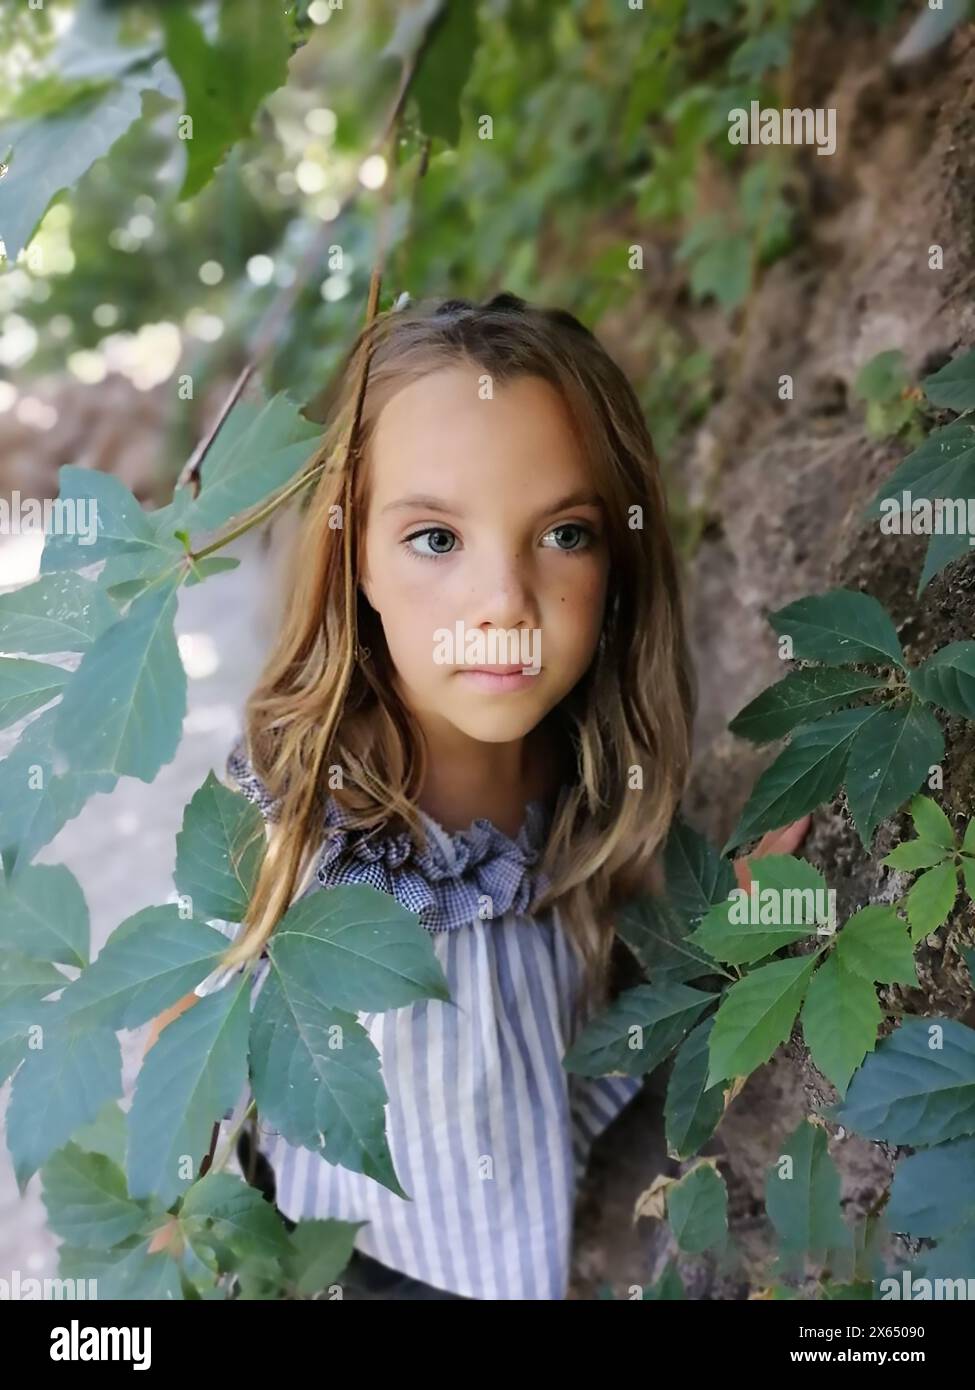 Little girl in the garden. Beautiful flowers roses. Cute lady watching thoughtfully. Child with big green eyes. Lovely flowers pink color. Green plant Stock Photo